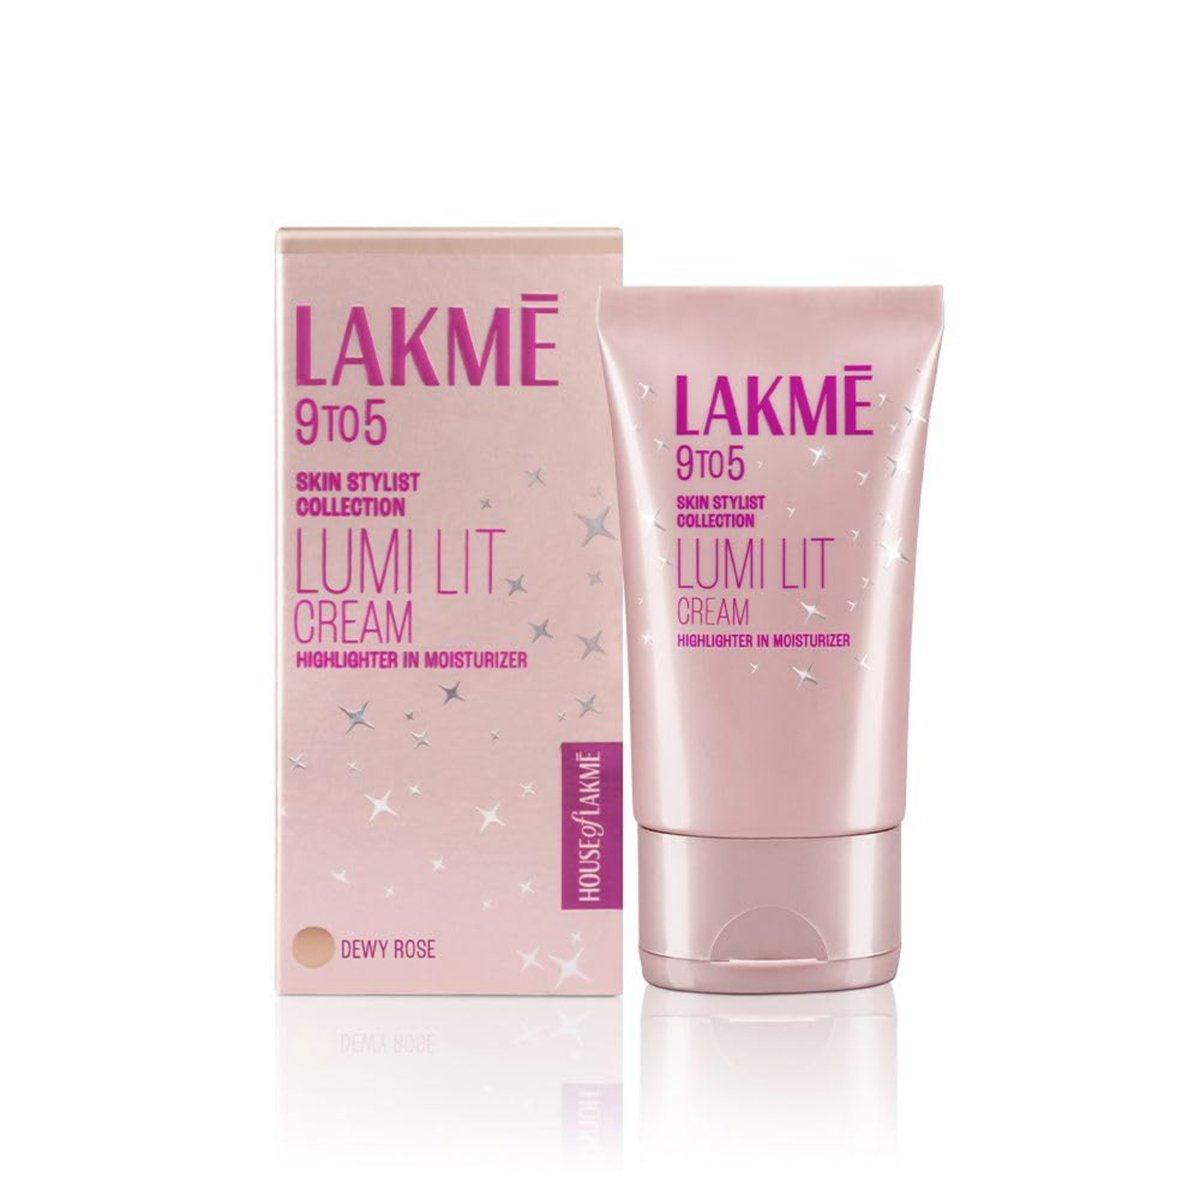 #Lakme Lumi #SkinCream 30 G at Rs. 179/-. Click on #Buy to avail this #offer

#ShopNow: freeecoupons.com/products/lakme…

#dealoftheday #dealhunter #dealfinder #deals #flashdeal #amazonfinds #amazon #amazonsale #Flipkart #flipkartsale #flipkartdeals #buynow #india #onlinesale #BestDeals